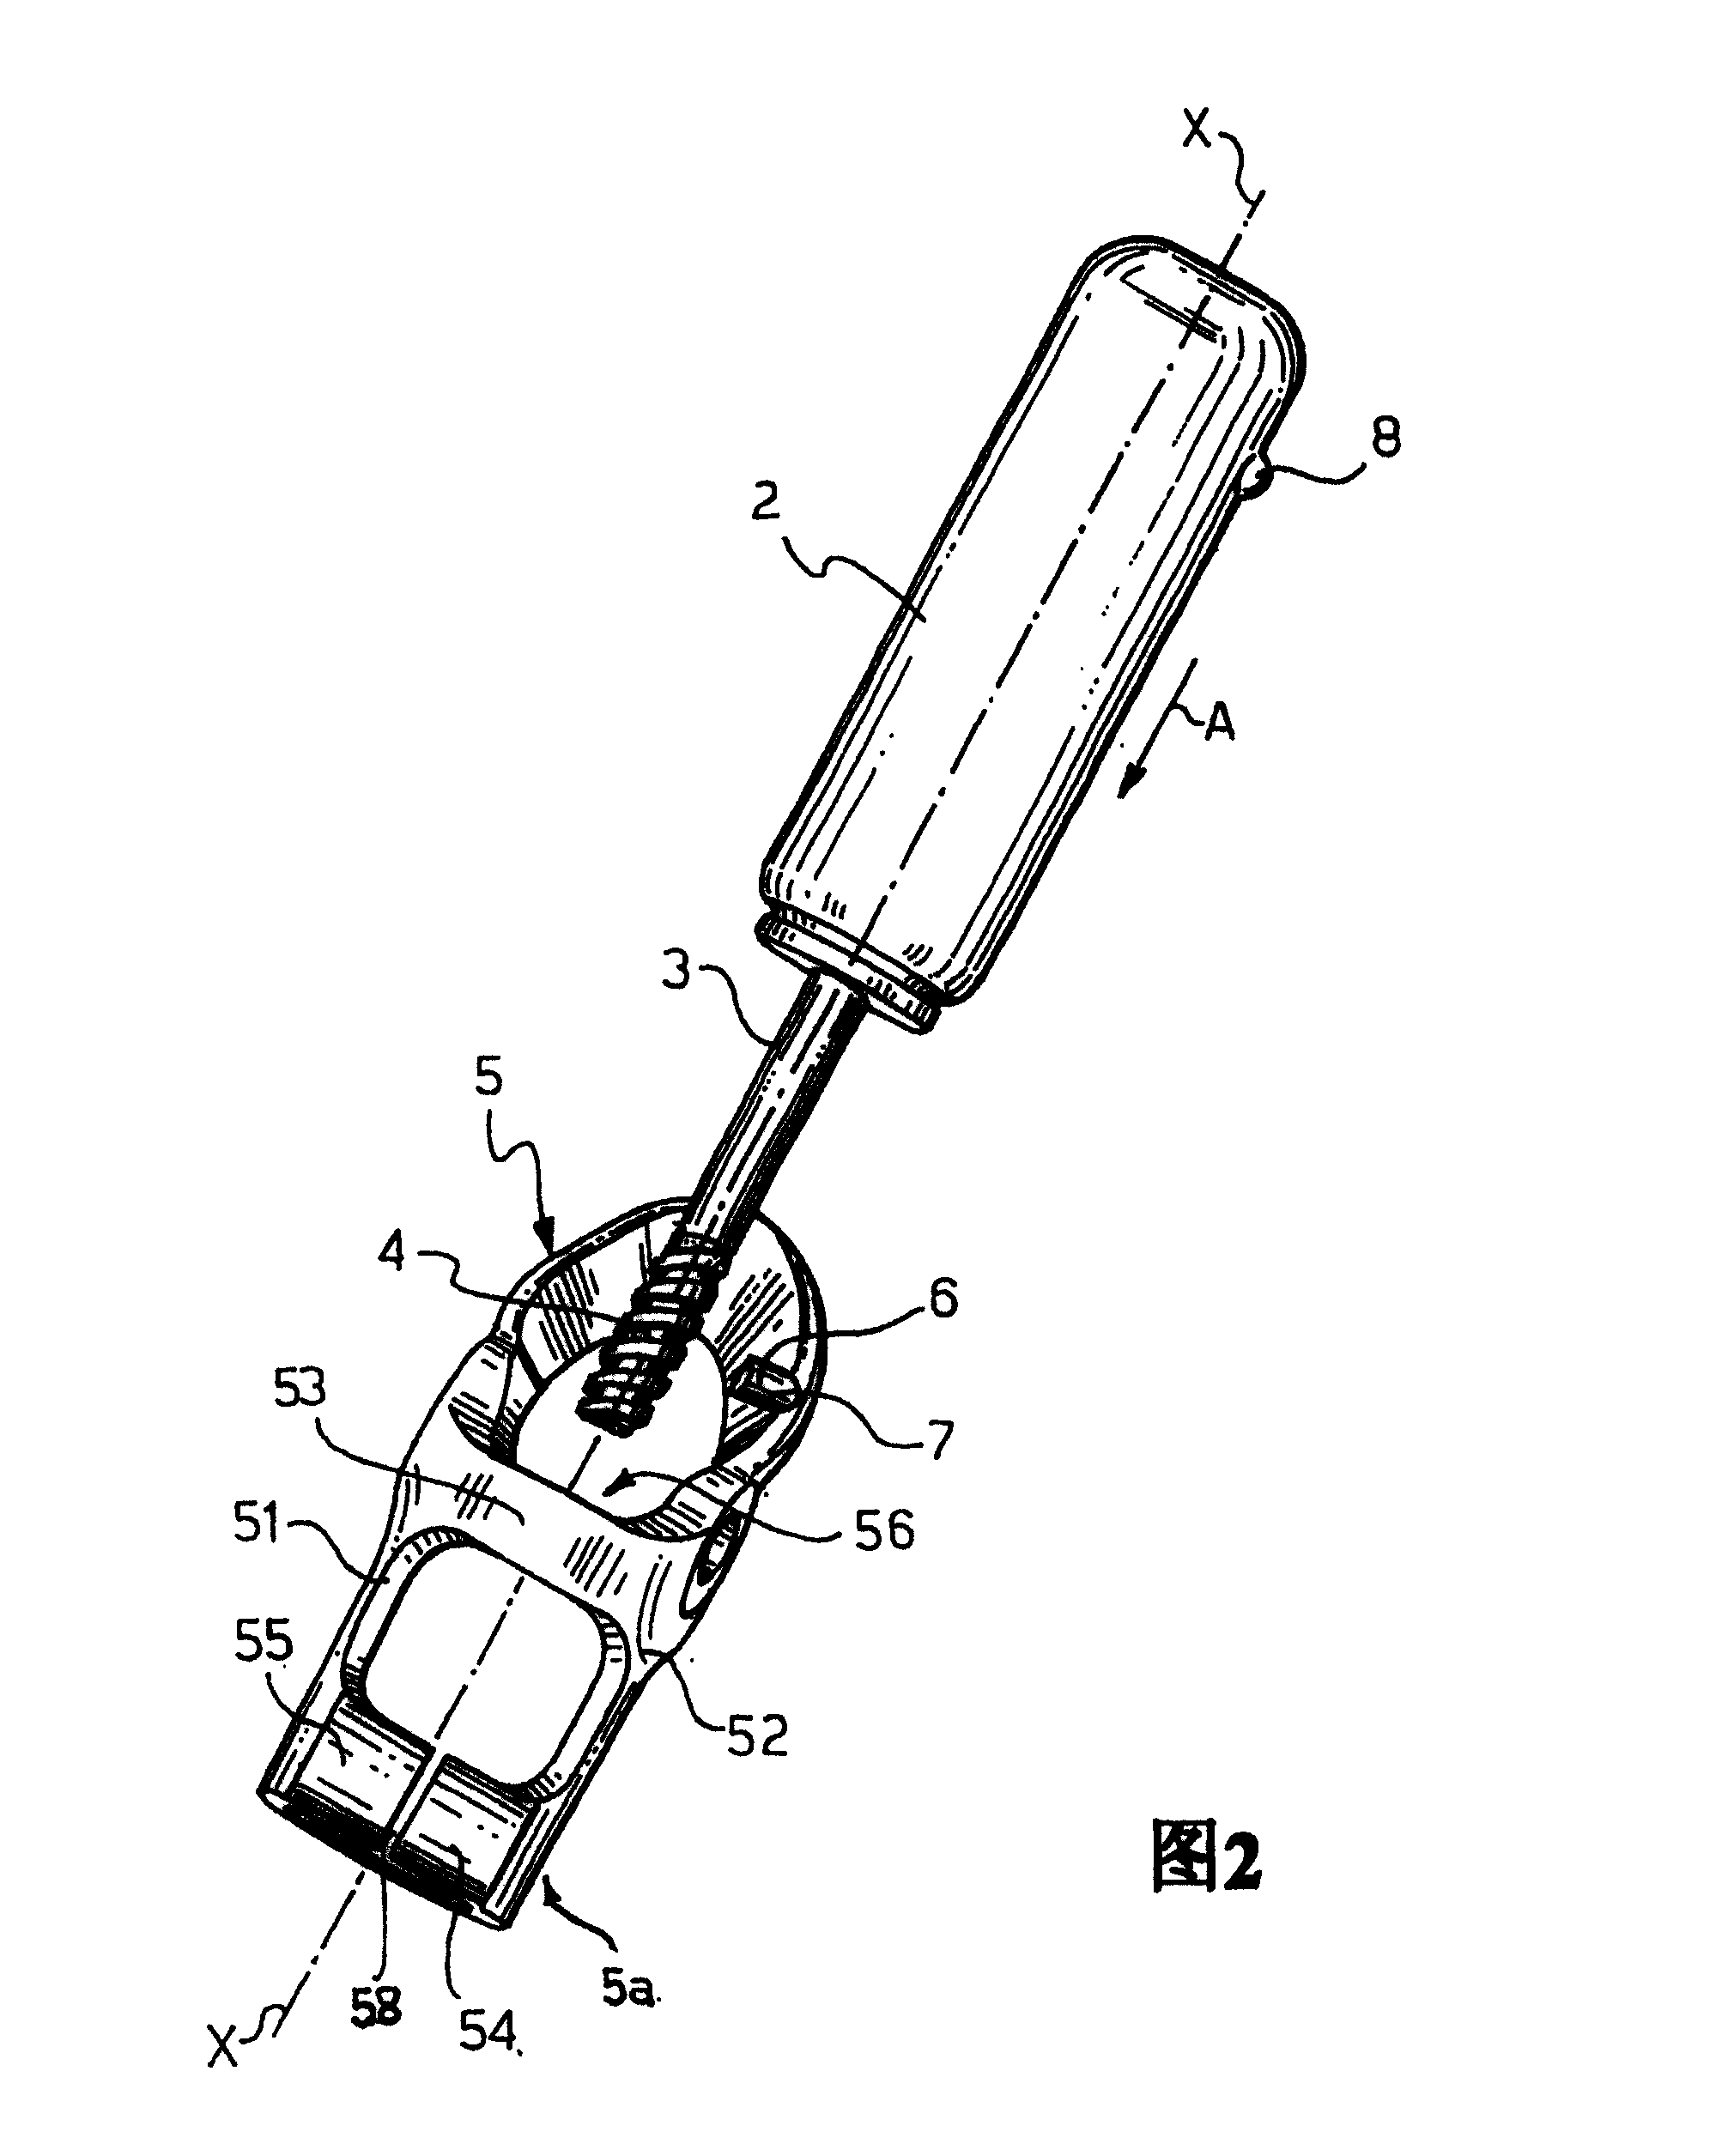 Actuator device for a bicycle gearshift